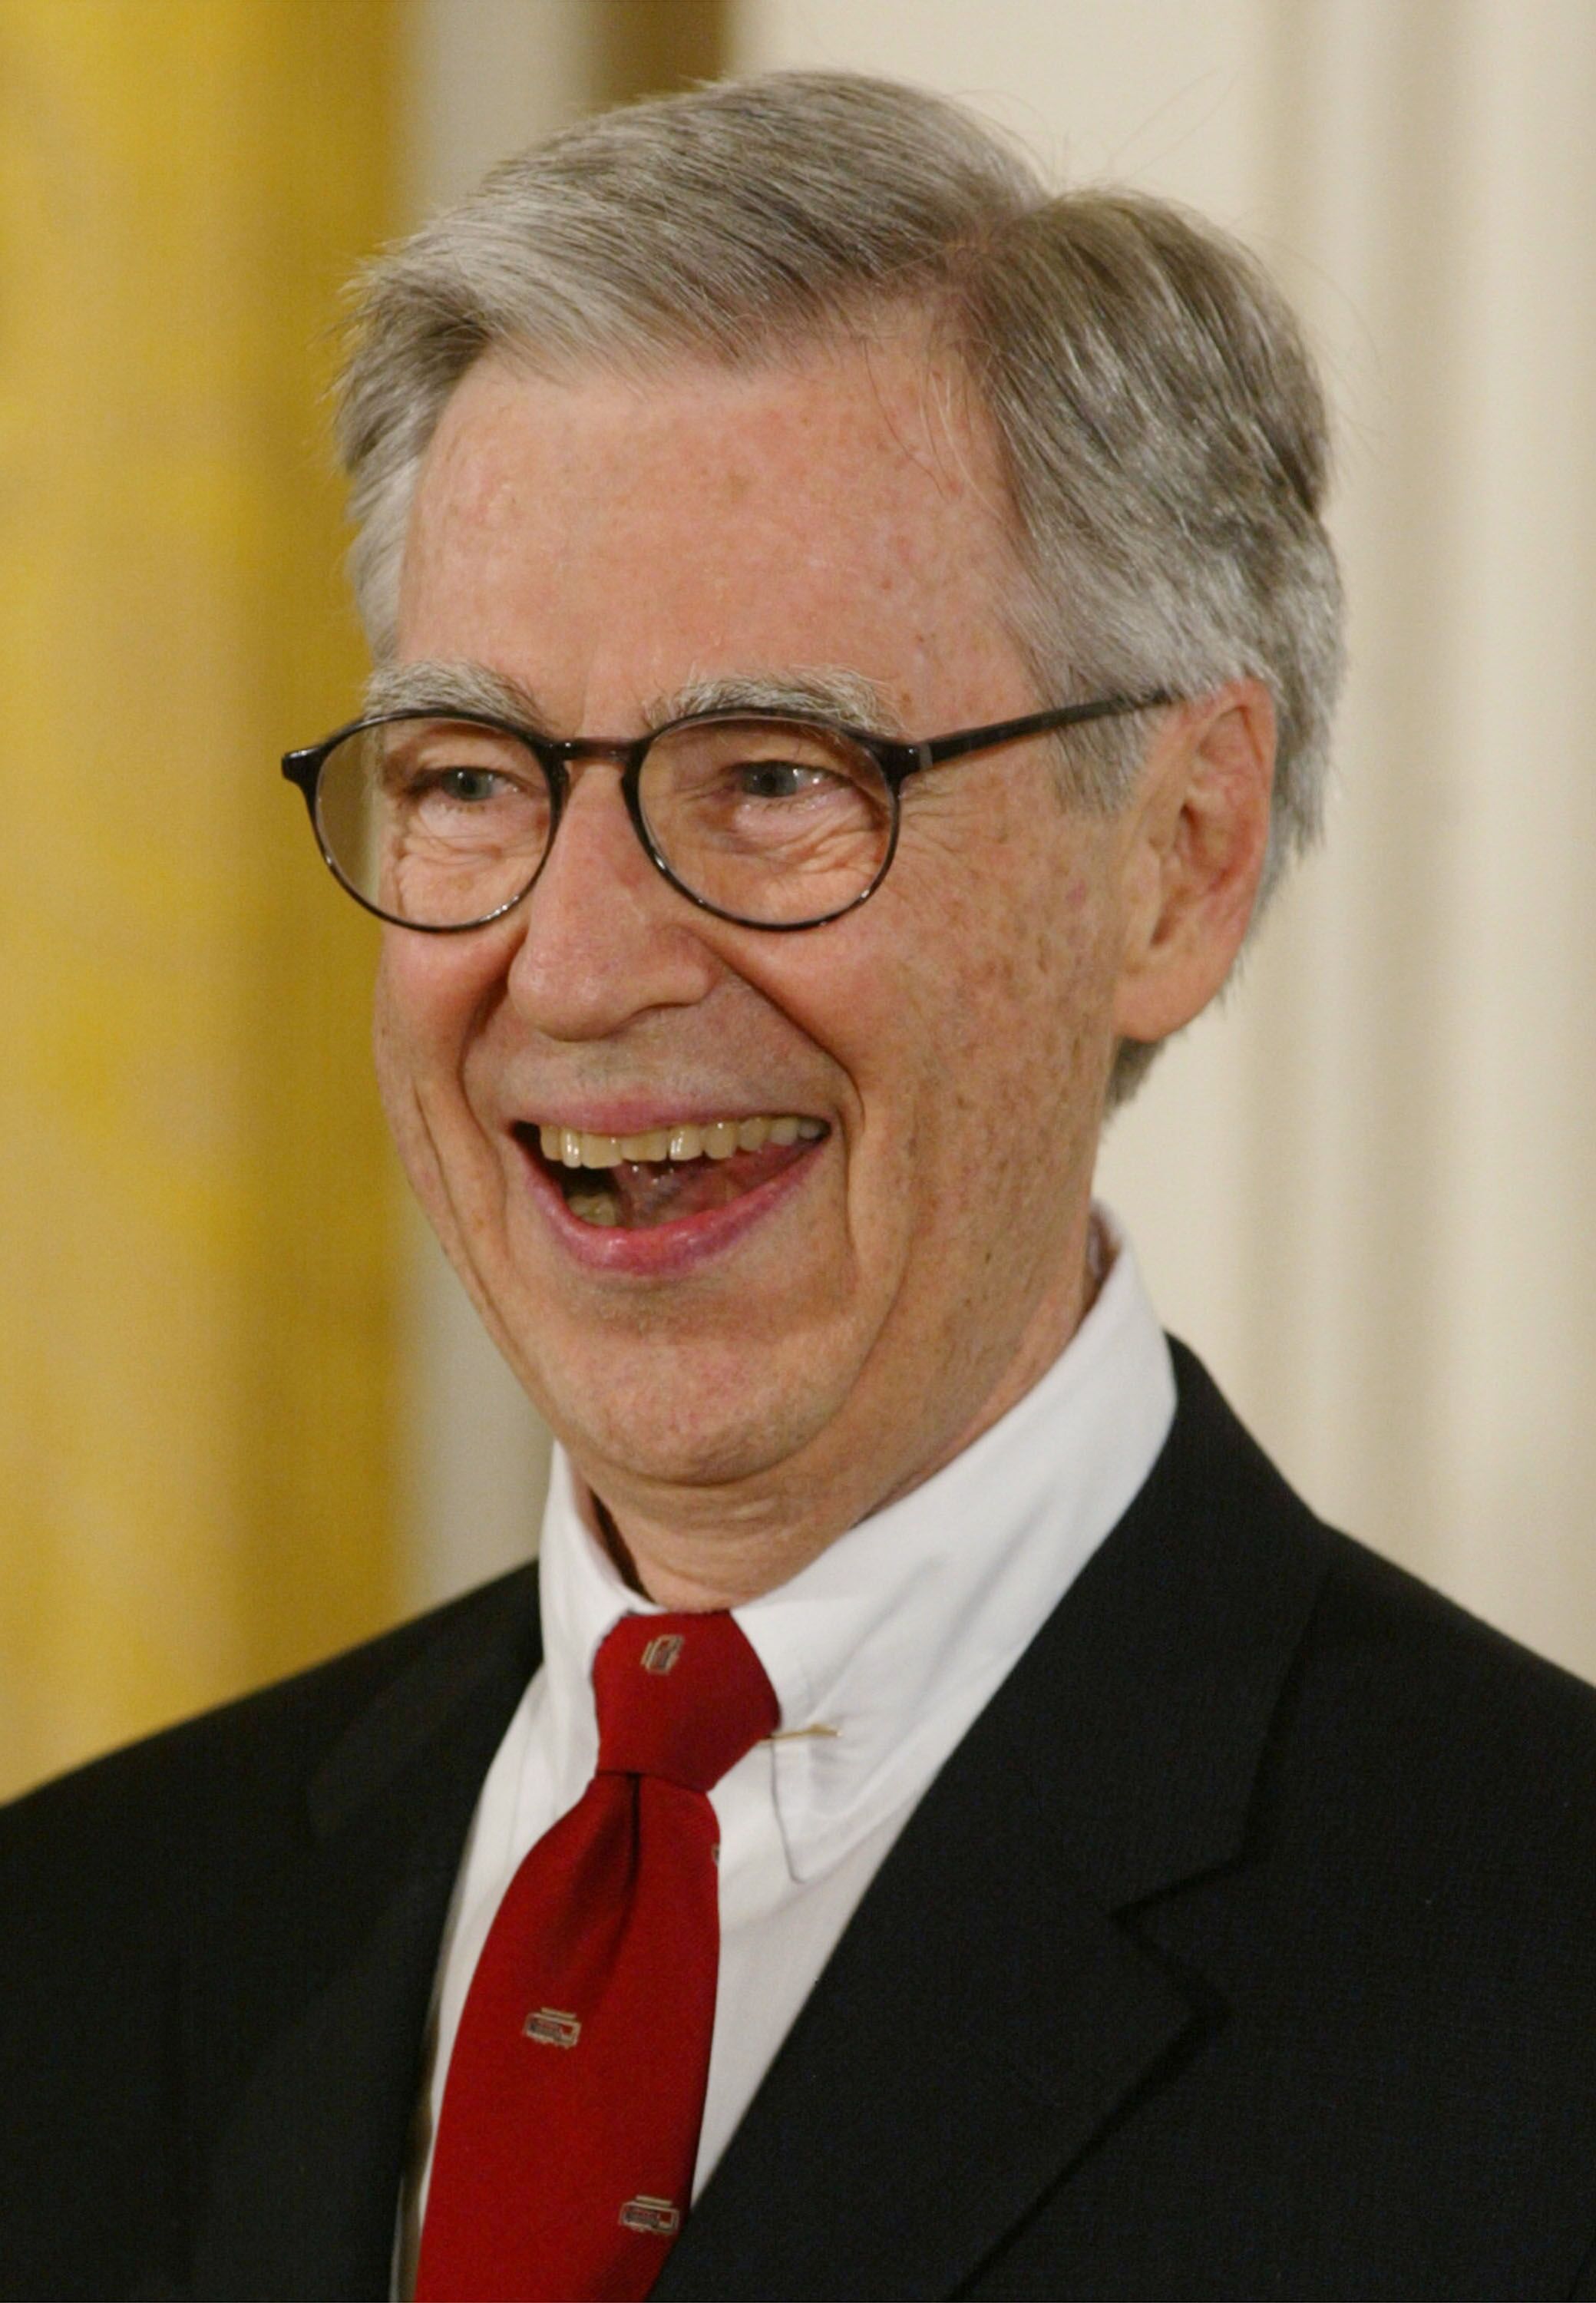 Fred Rogers smiles after receiving the Presidential Medal of Freedom Award. | Source: Getty Images